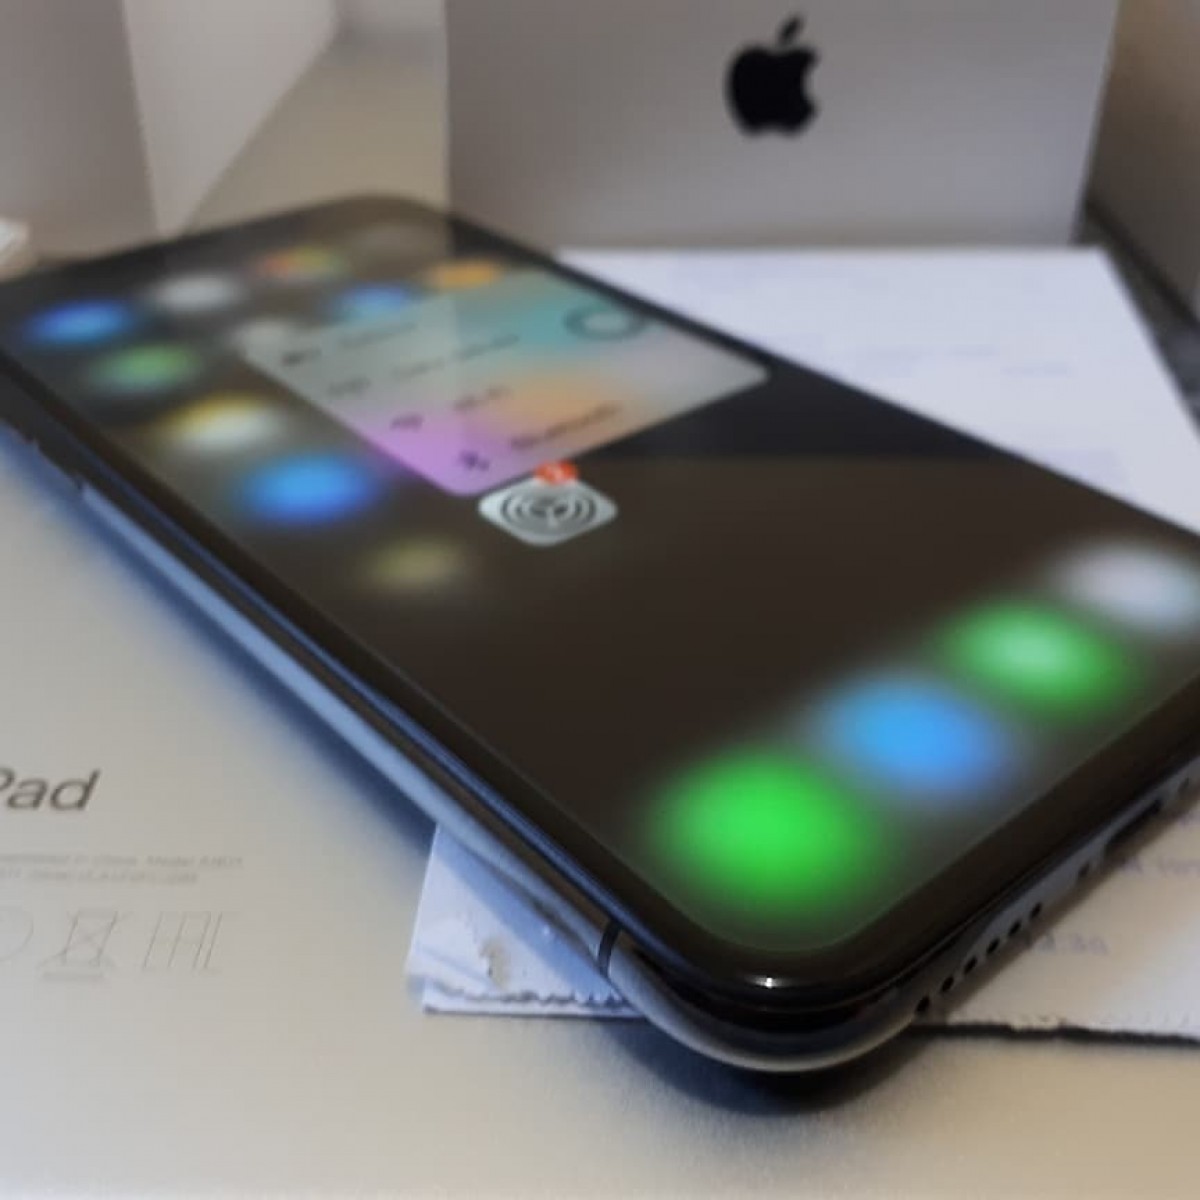 IPhone Xs Max 512gb for sale in St Andrew Kingston St Andrew - Phones